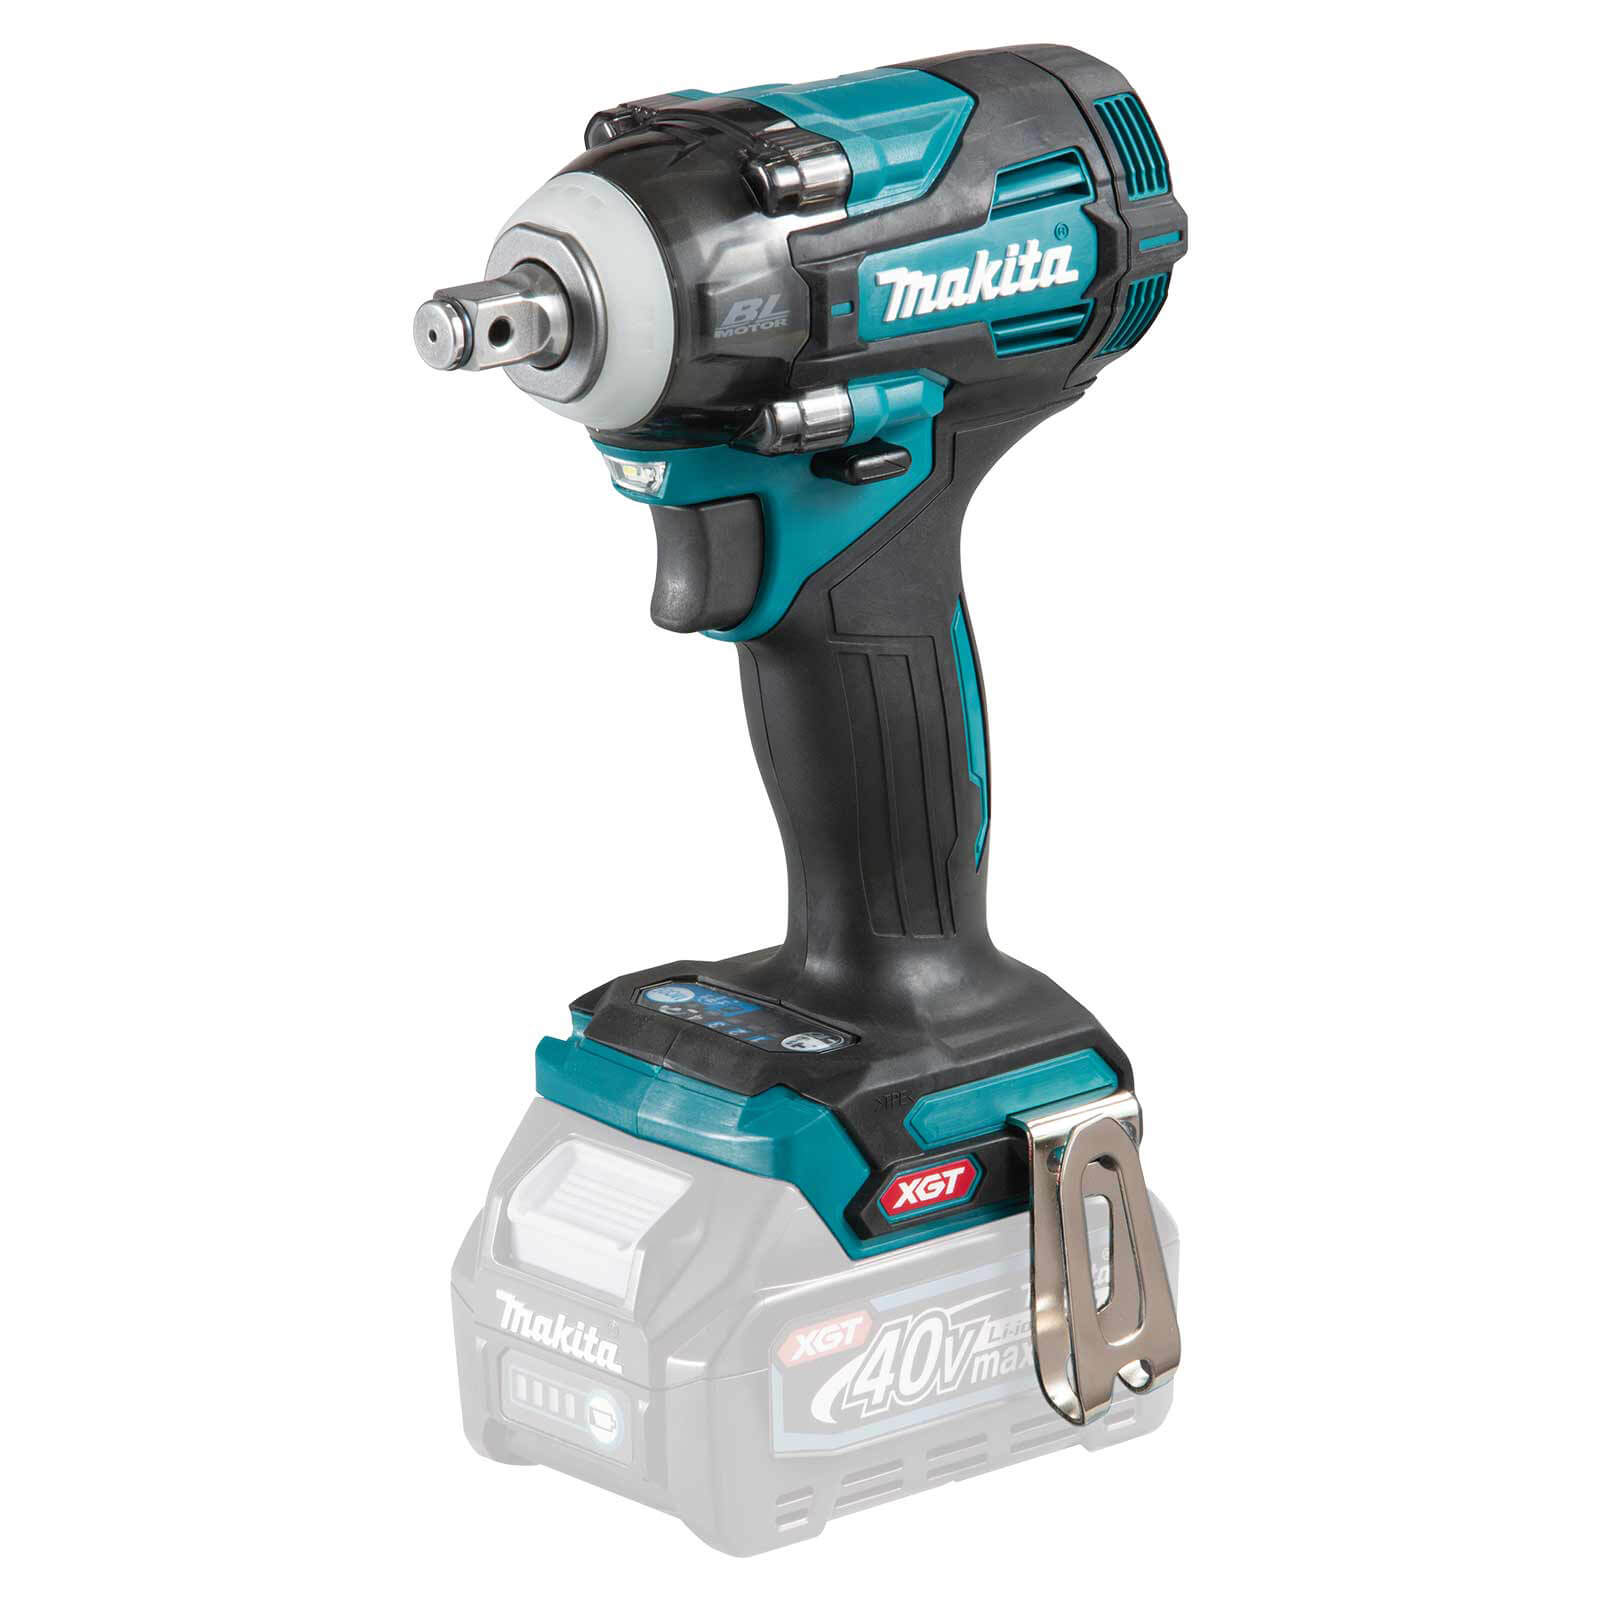 Image of Makita TW004G 40v Max XGT Cordless Brushless 1/2" Drive Impact Wrench No Batteries No Charger No Case